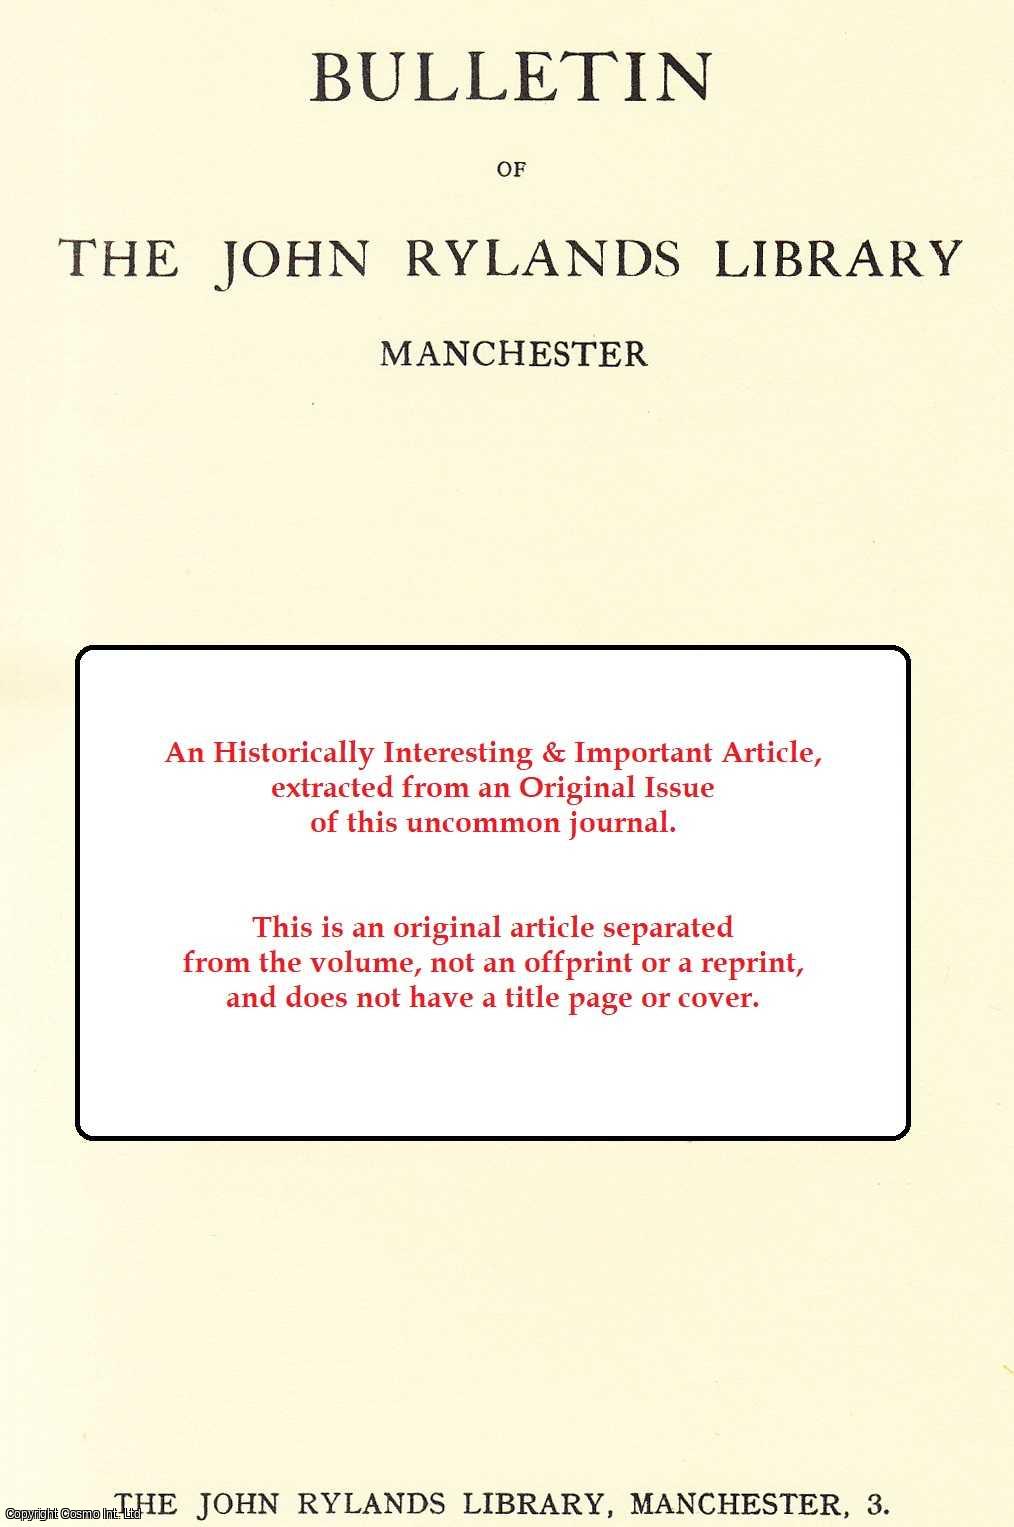 Eric John - The King and the Monks in the Tenth-Century Reformation. An original article from the Bulletin of the John Rylands Library Manchester, 1959.